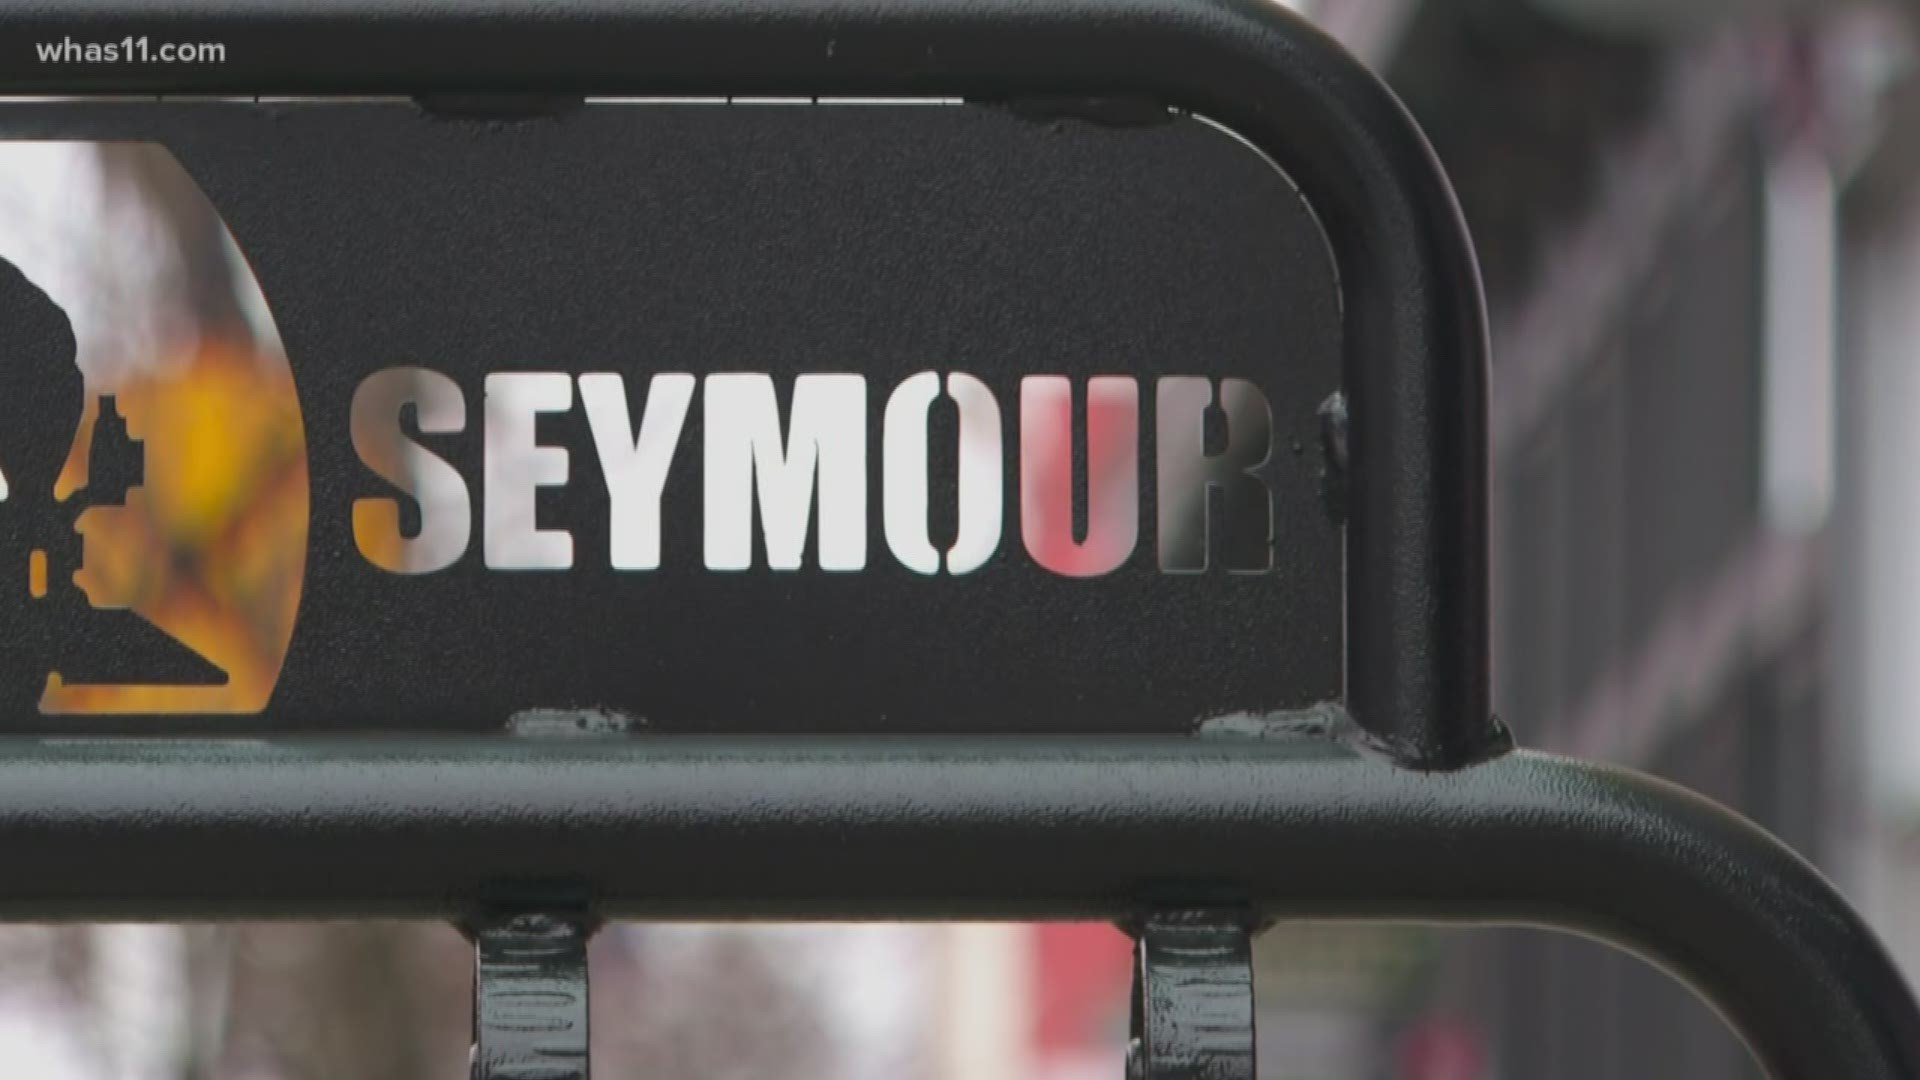 Seymour Indiana is hoping to make it big in more ways than one!